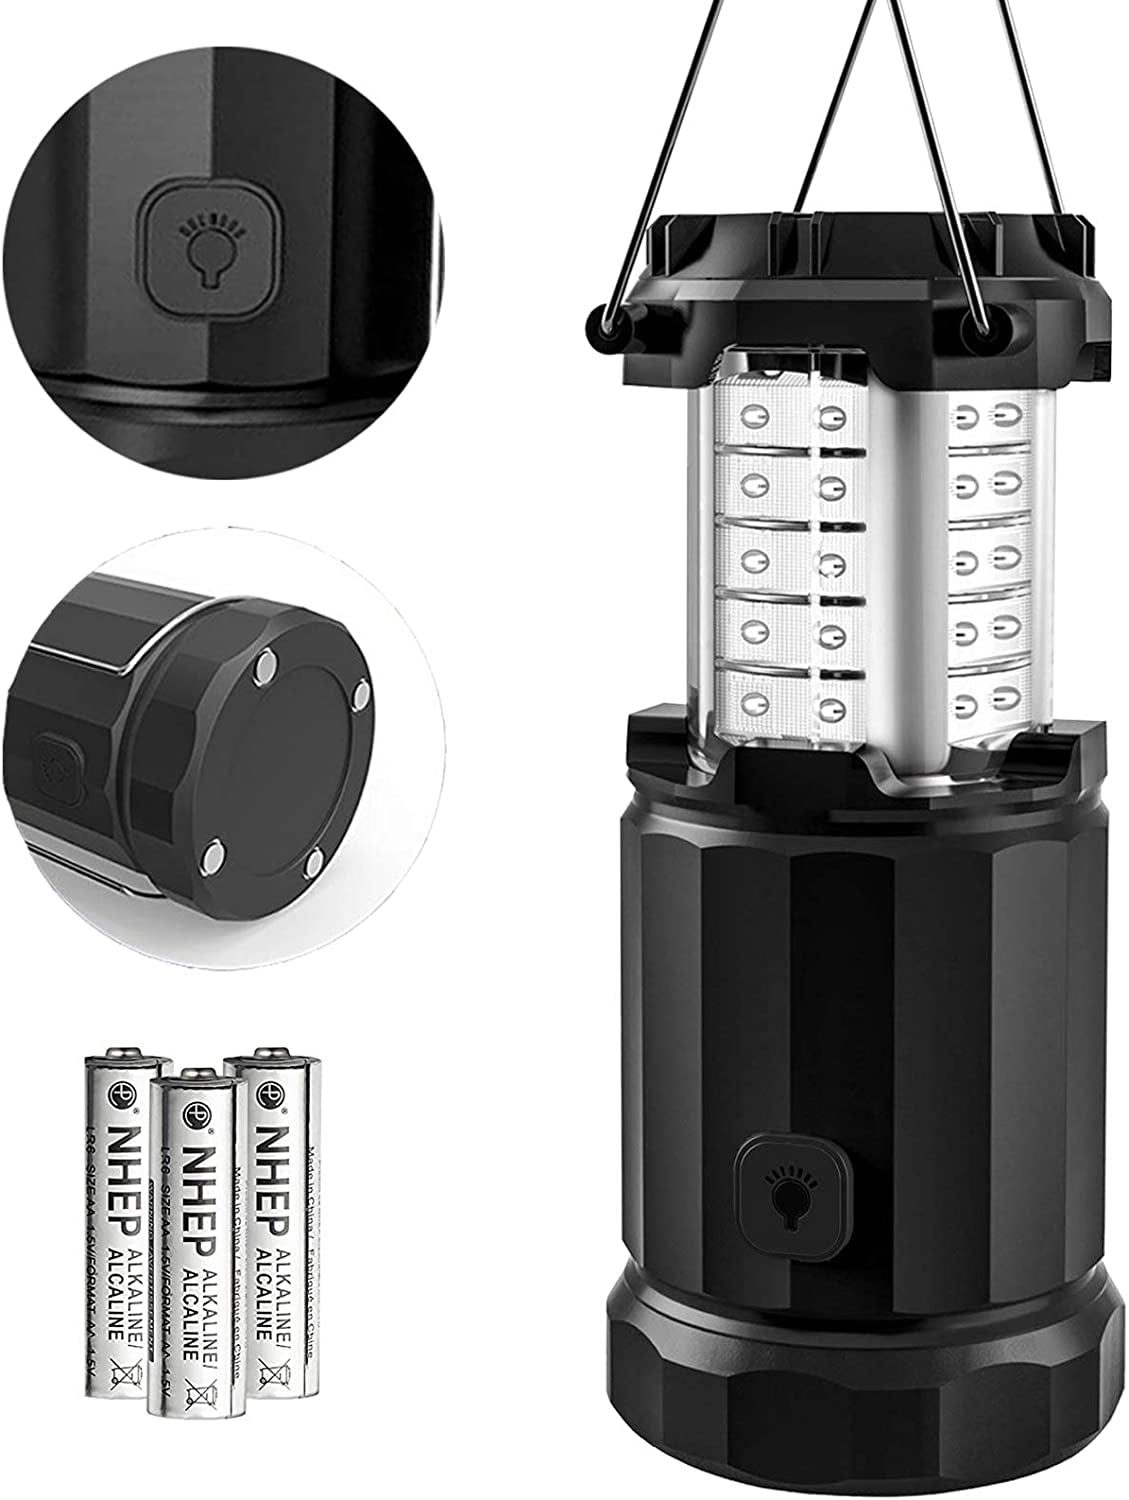 Etekcity Collapsible LED Lantern Model CL10 Camping Outdoors